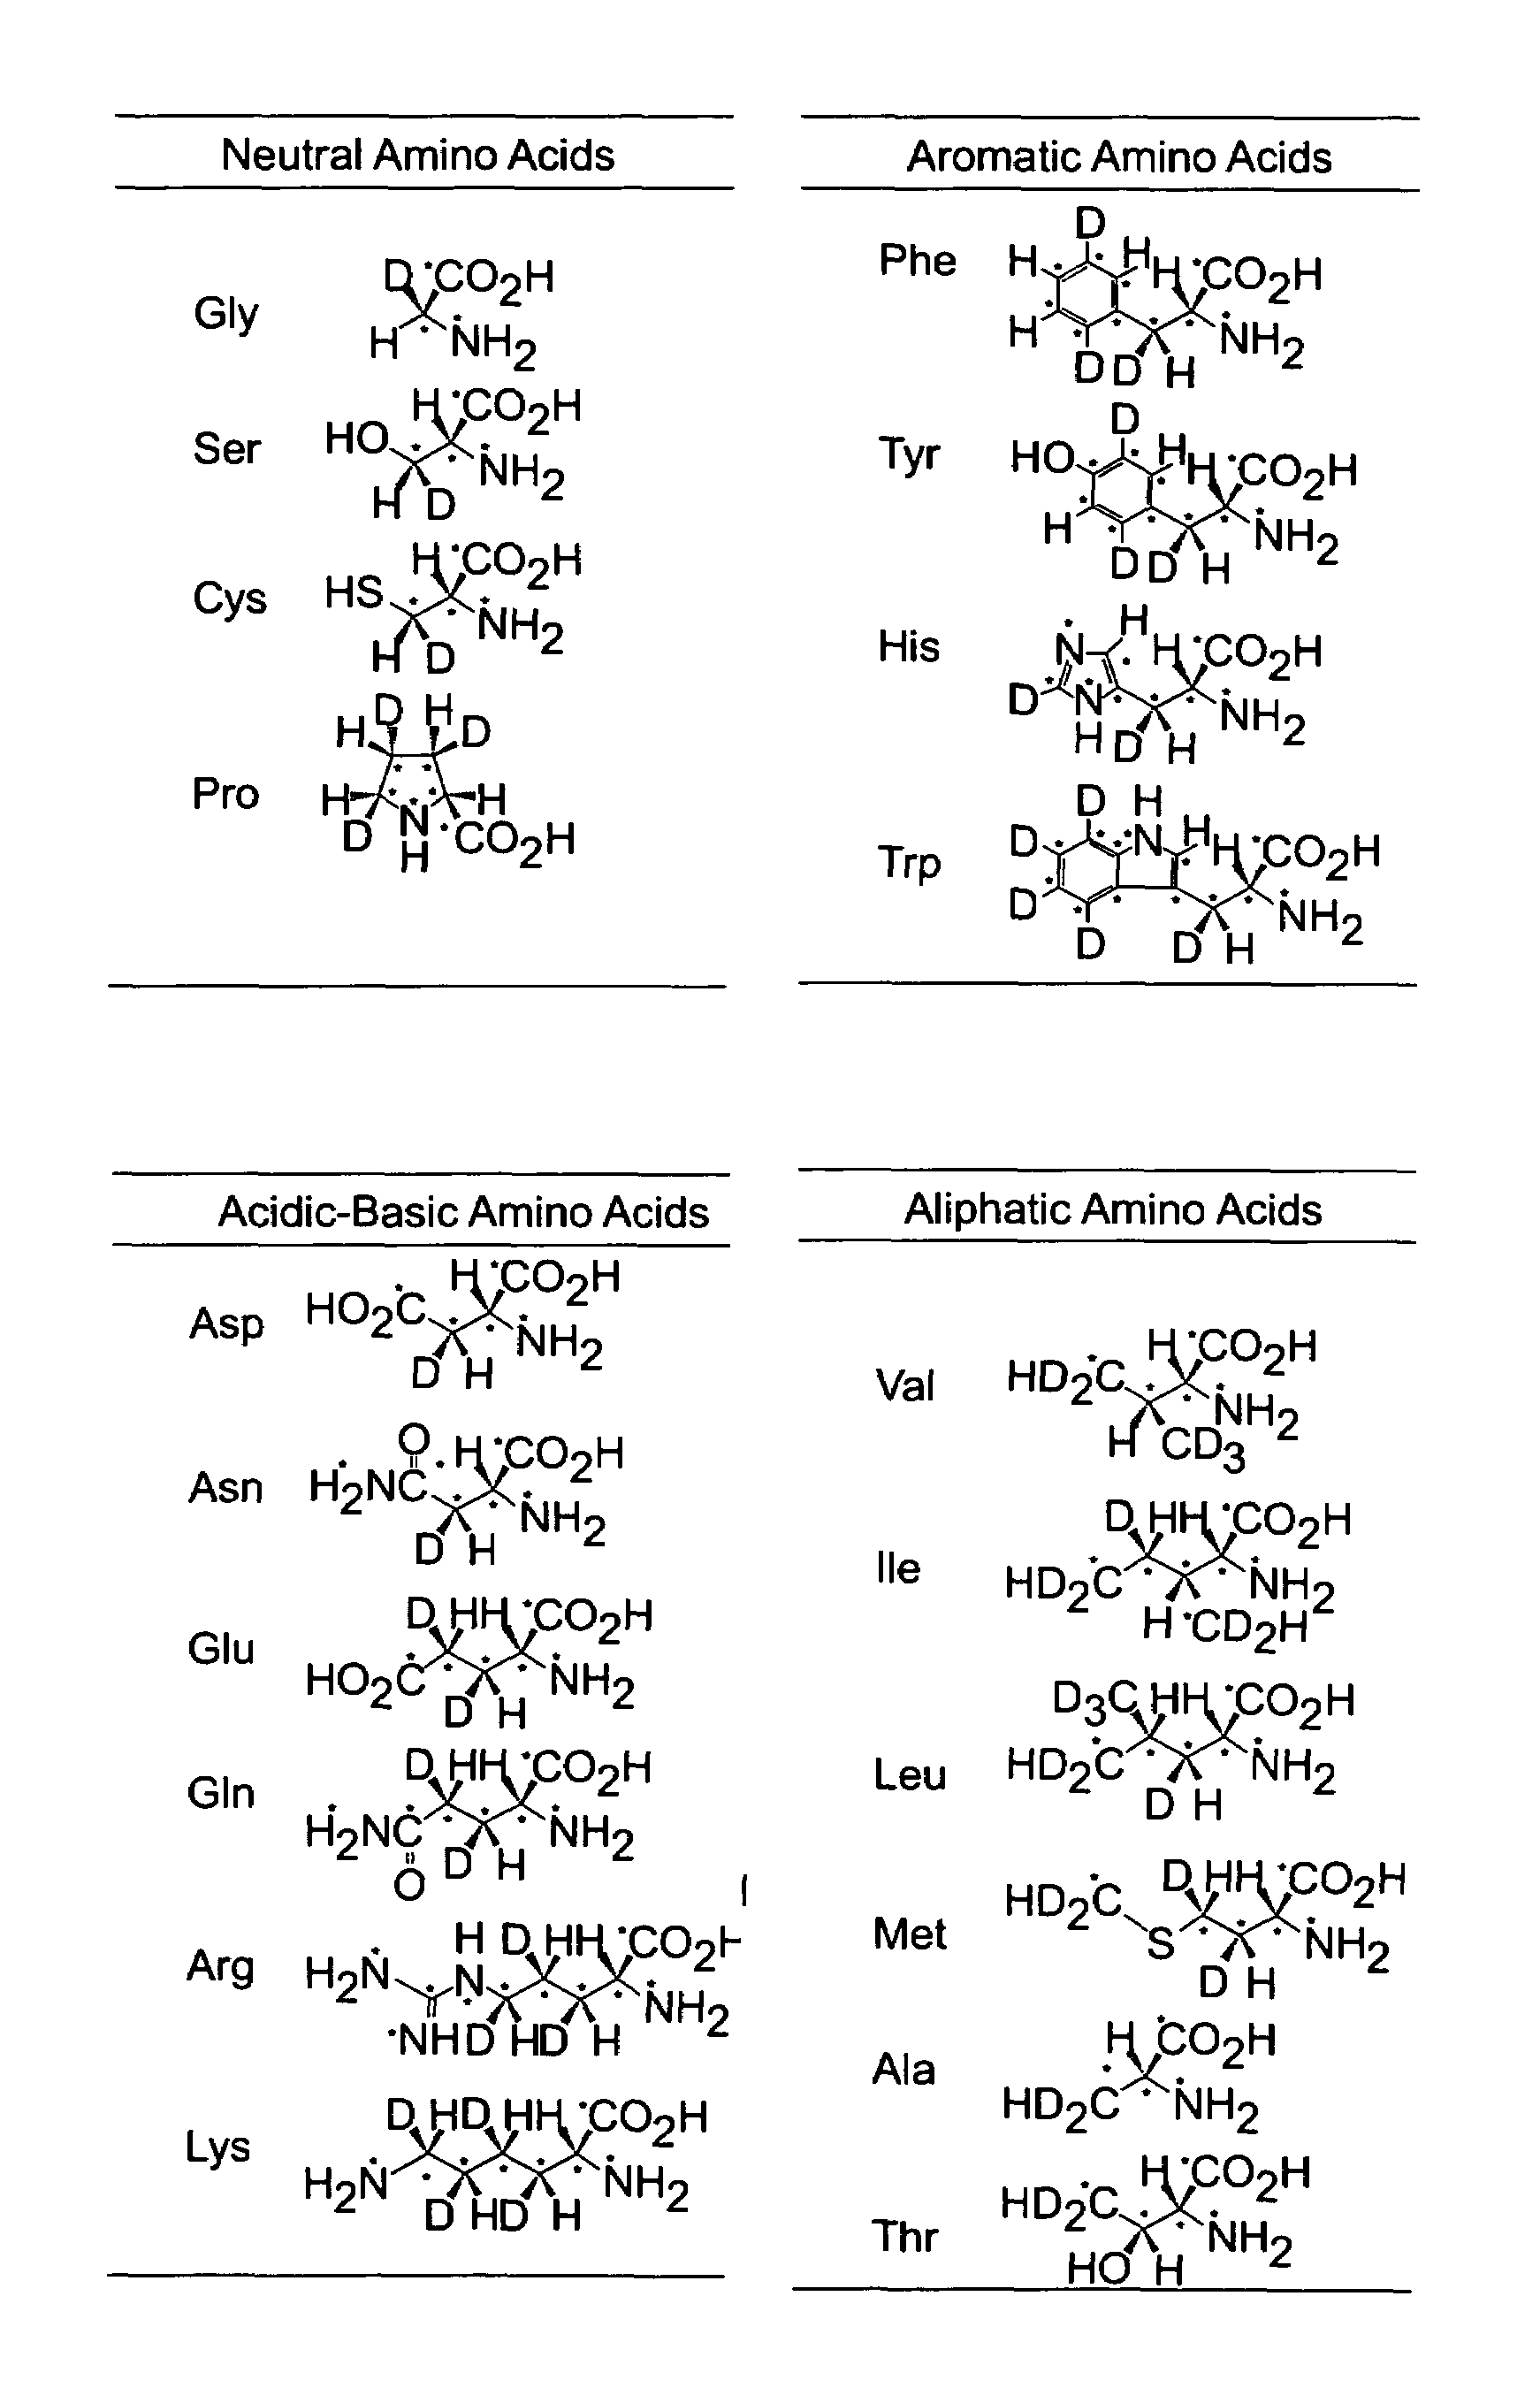 Stable isotope-labeled amino acid and method for incorporating same into target protein